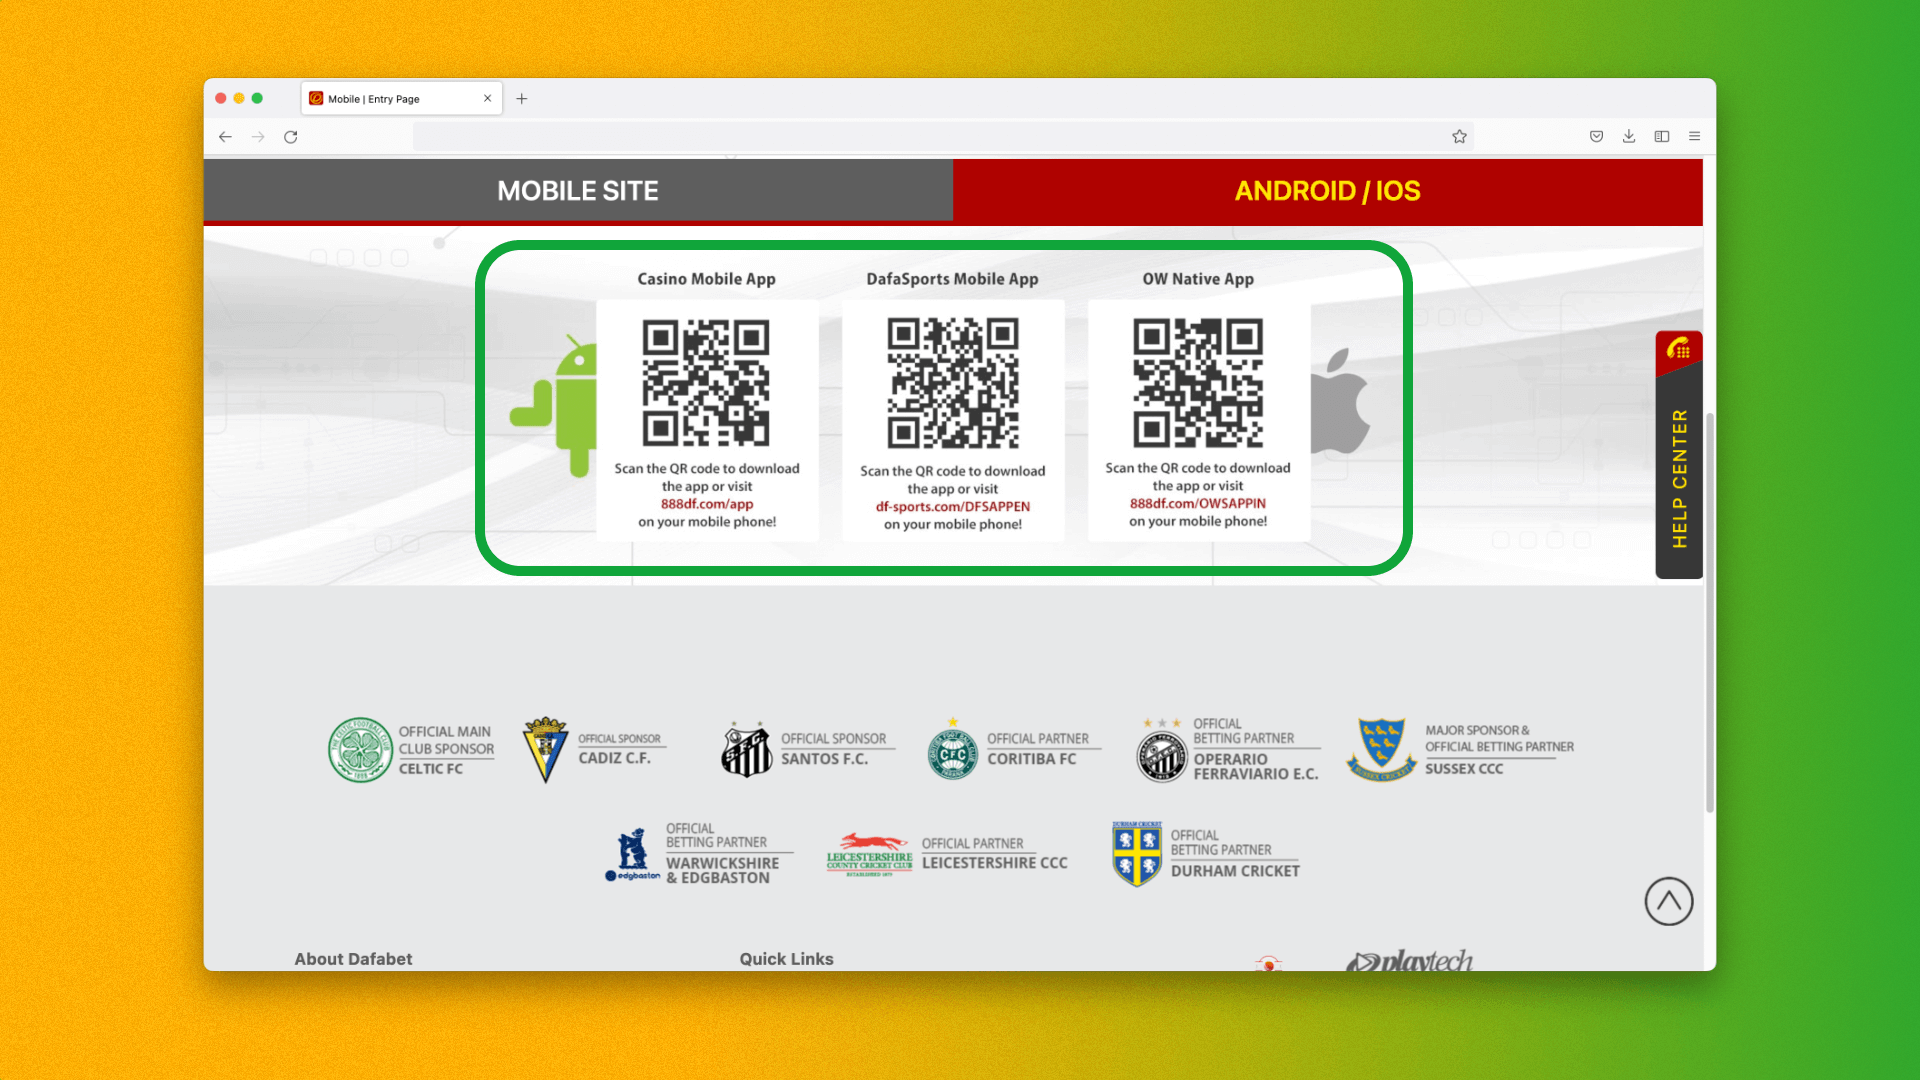 qr code to download the dafabet mobile app